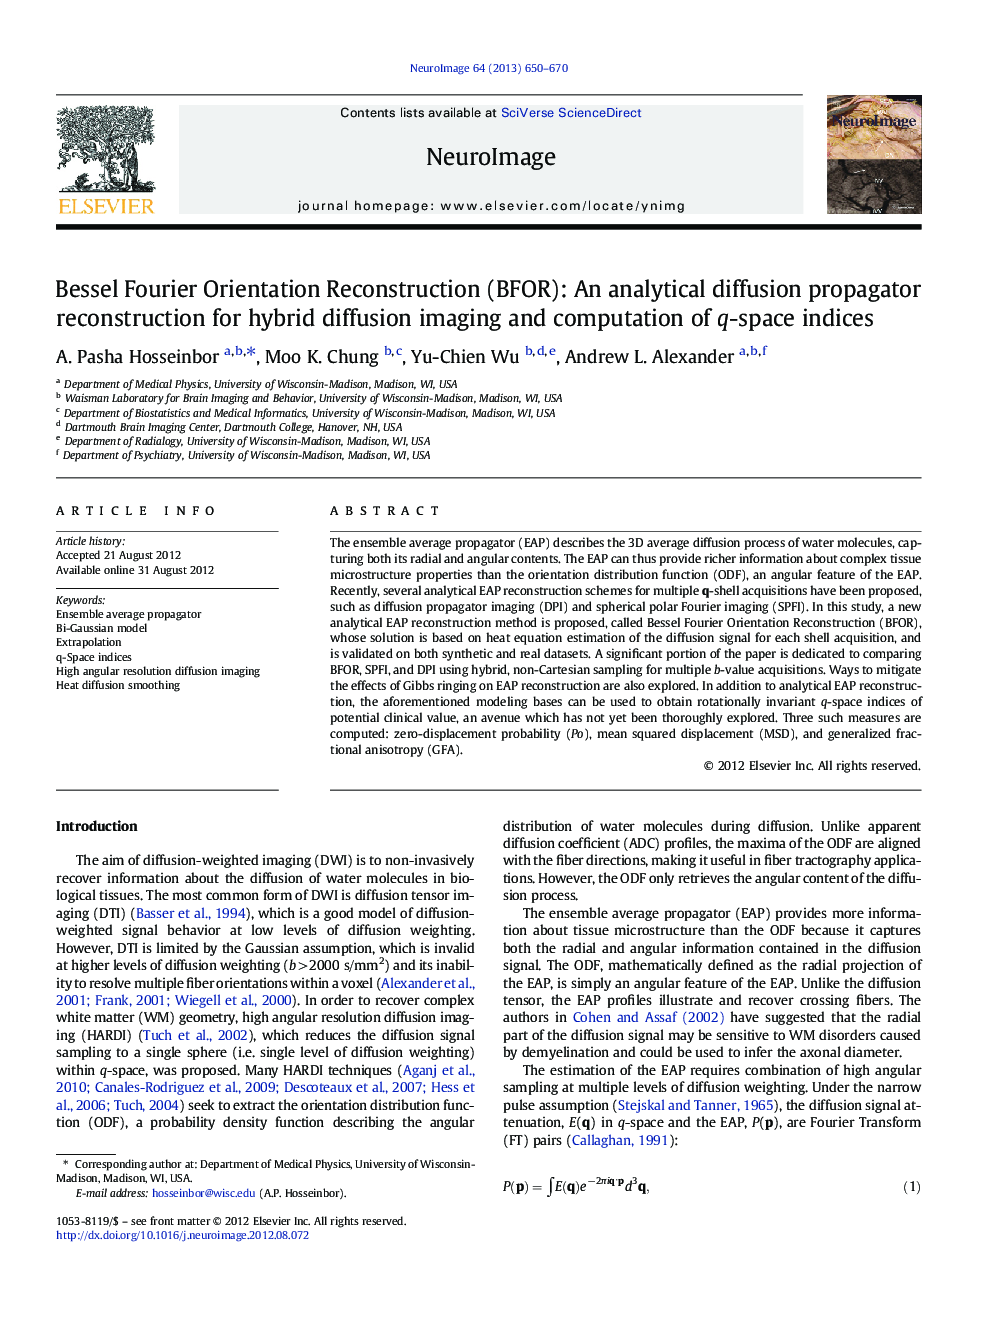 Bessel Fourier Orientation Reconstruction (BFOR): An analytical diffusion propagator reconstruction for hybrid diffusion imaging and computation of q-space indices